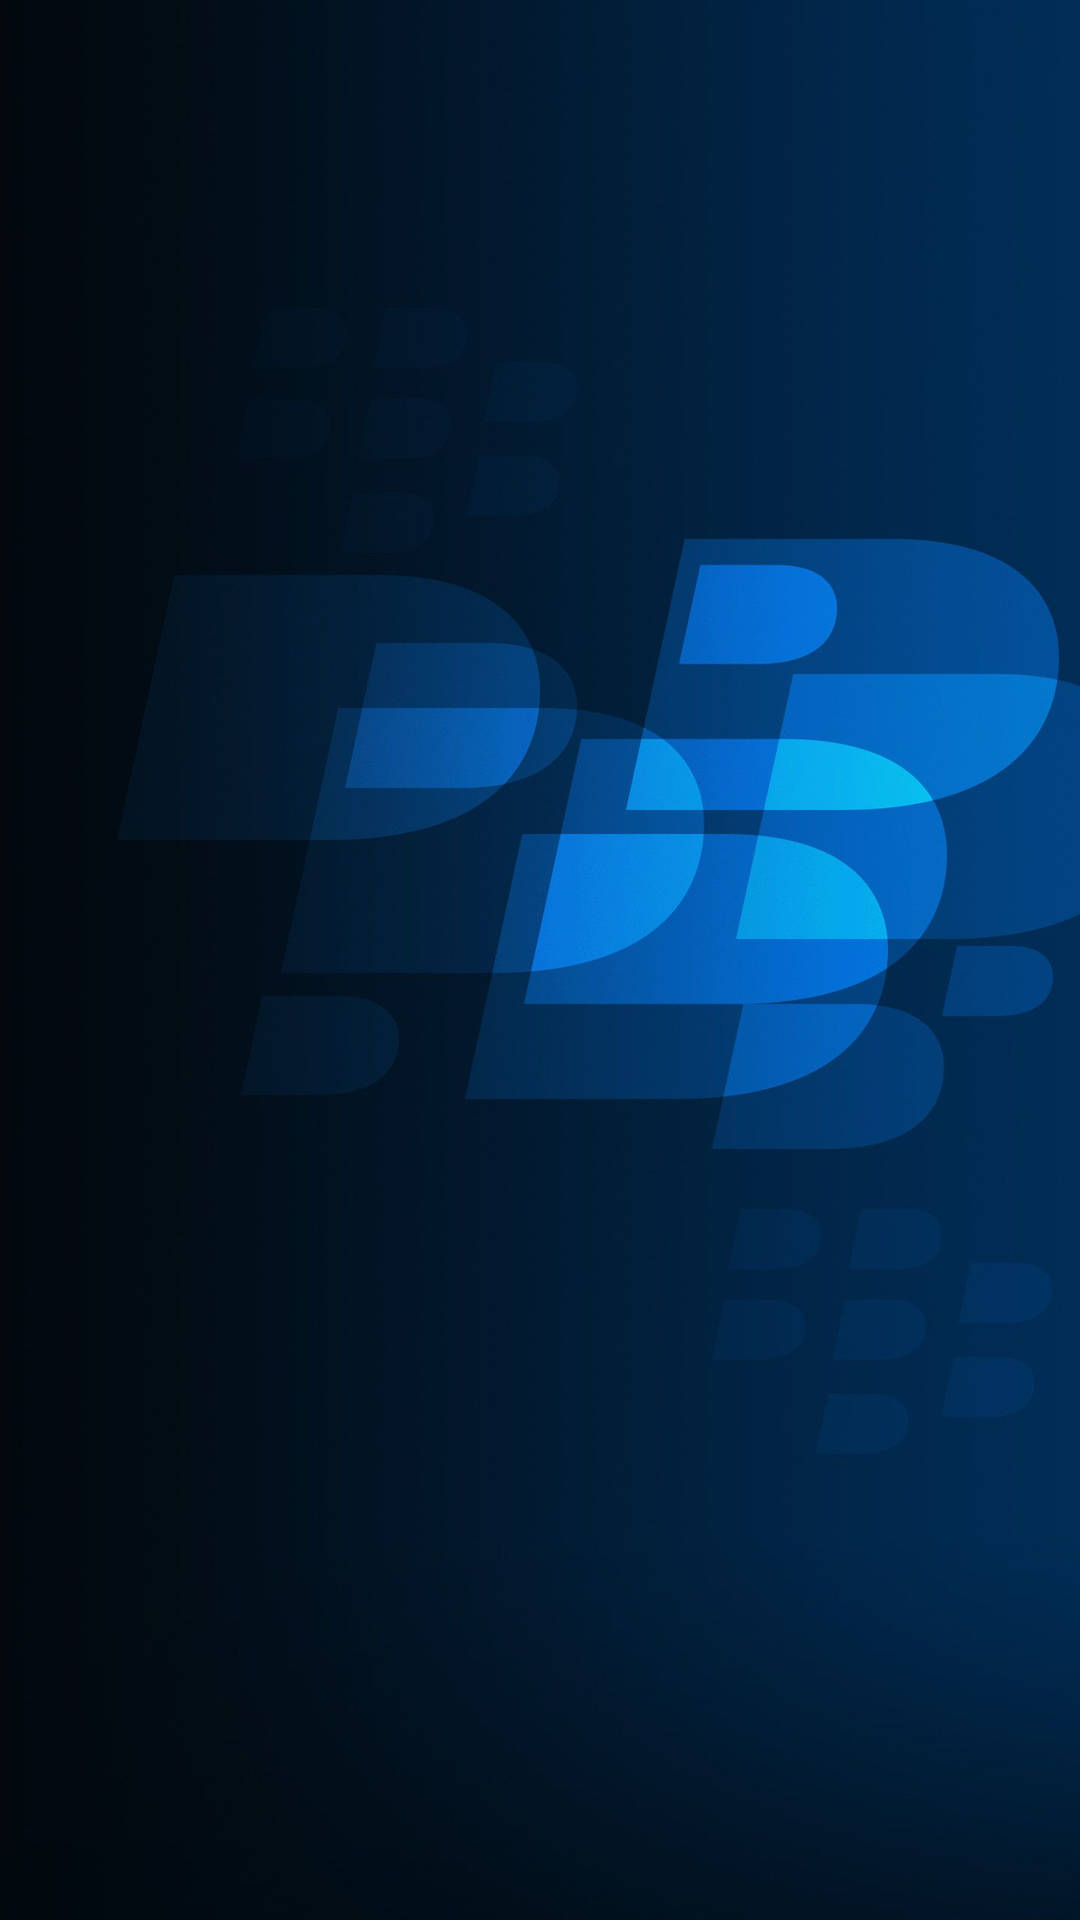 Blackberry Priv geometric wallpapers for iPhone